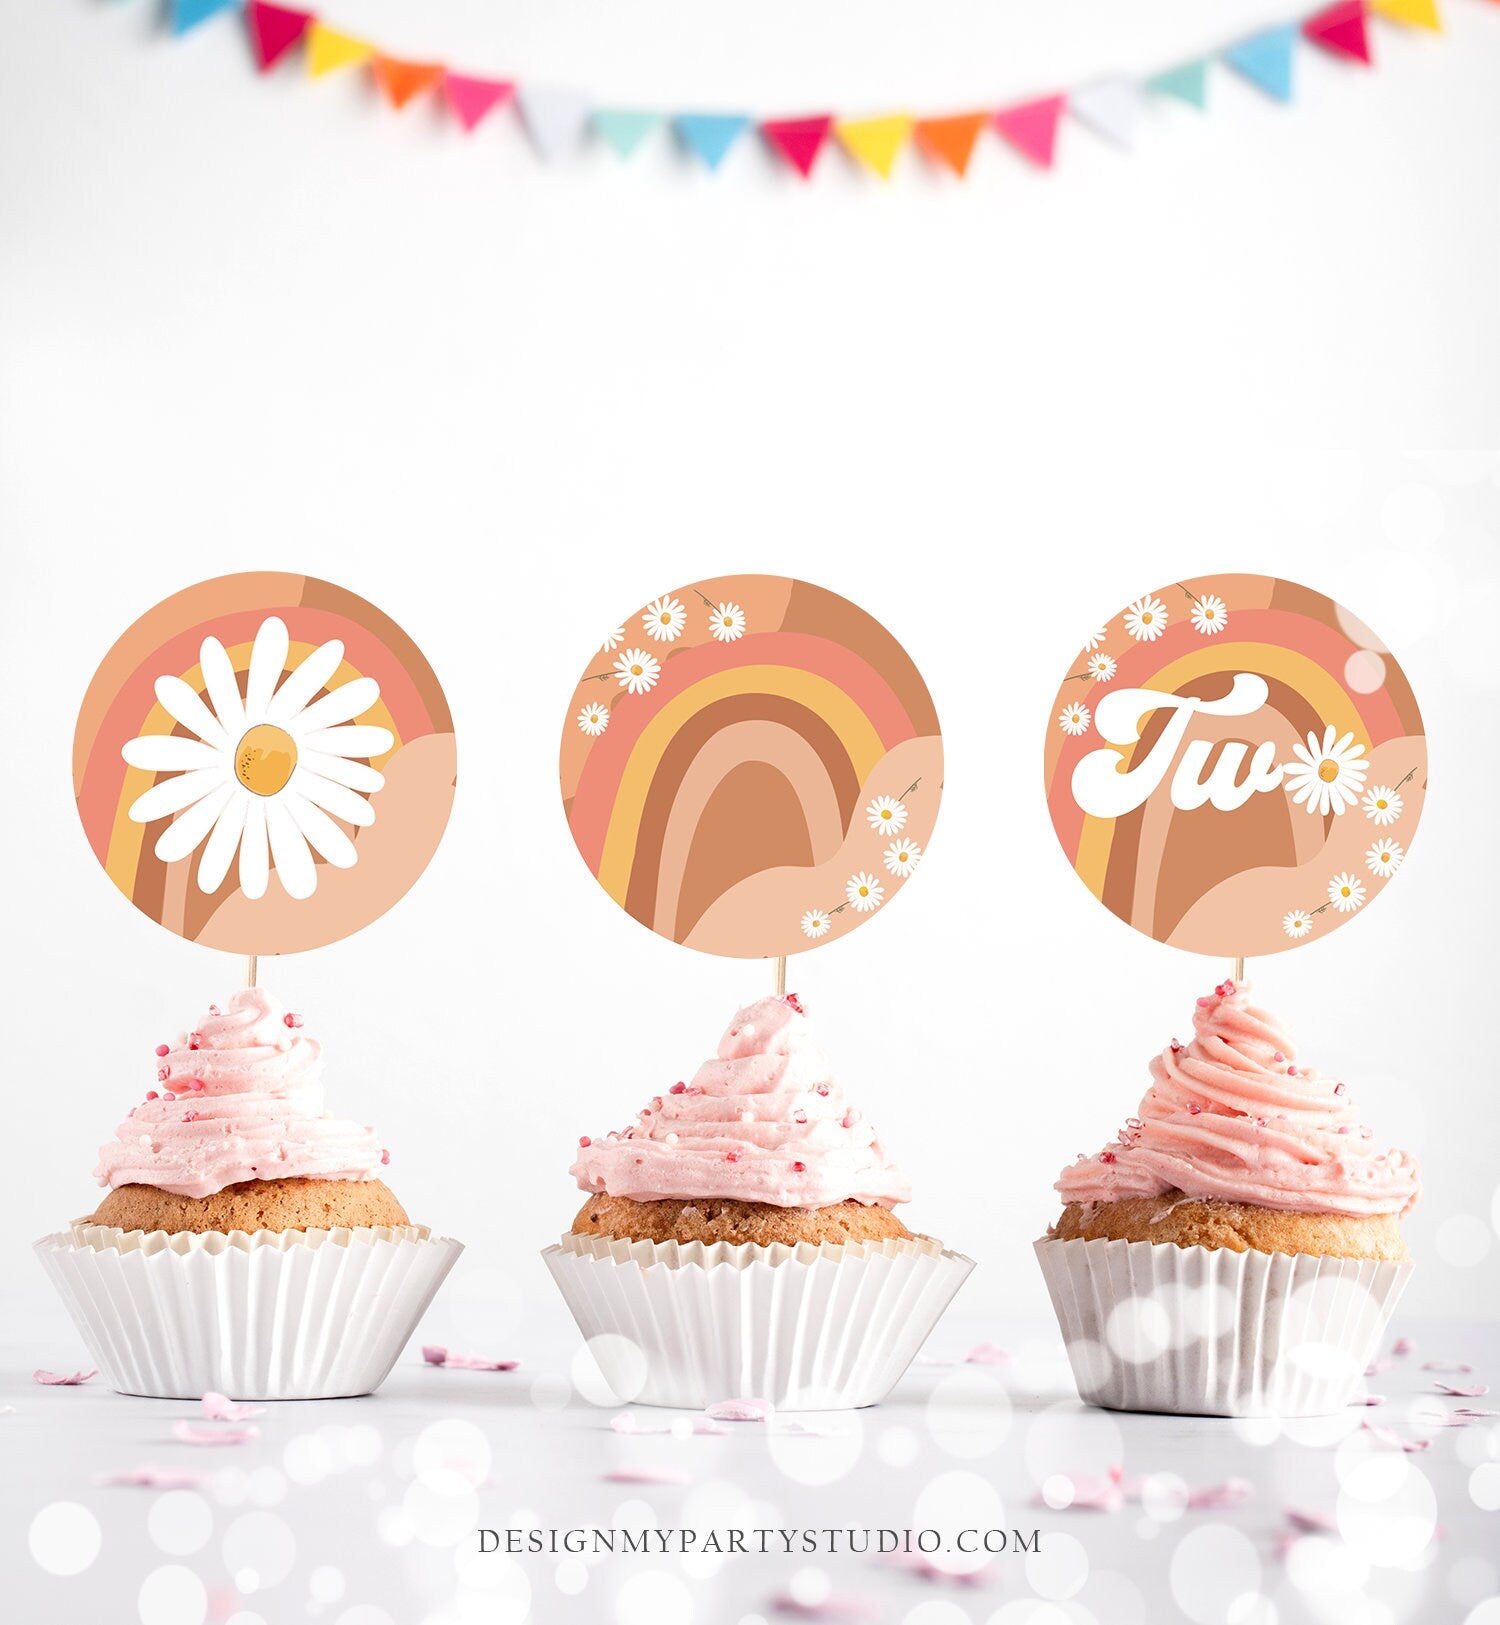 Two Groovy Birthday Cupcake Toppers Favor Tags Retro Daisy Birthday Party Decor 2nd Flower Power Festival Download Digital PRINTABLE 0428